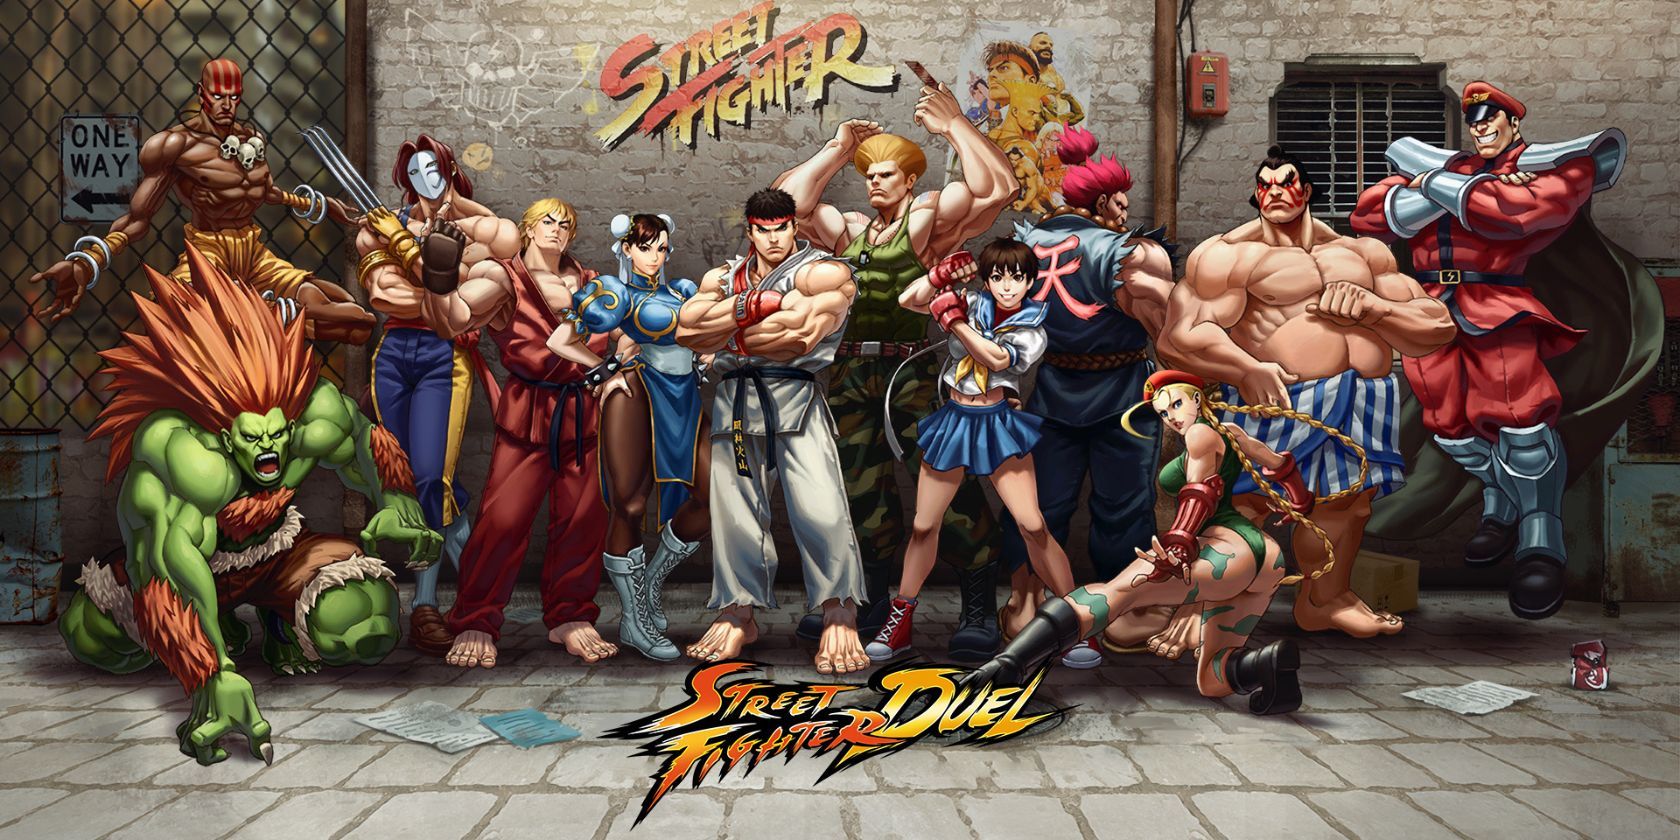 Street Fighter: Duel - Apps on Google Play